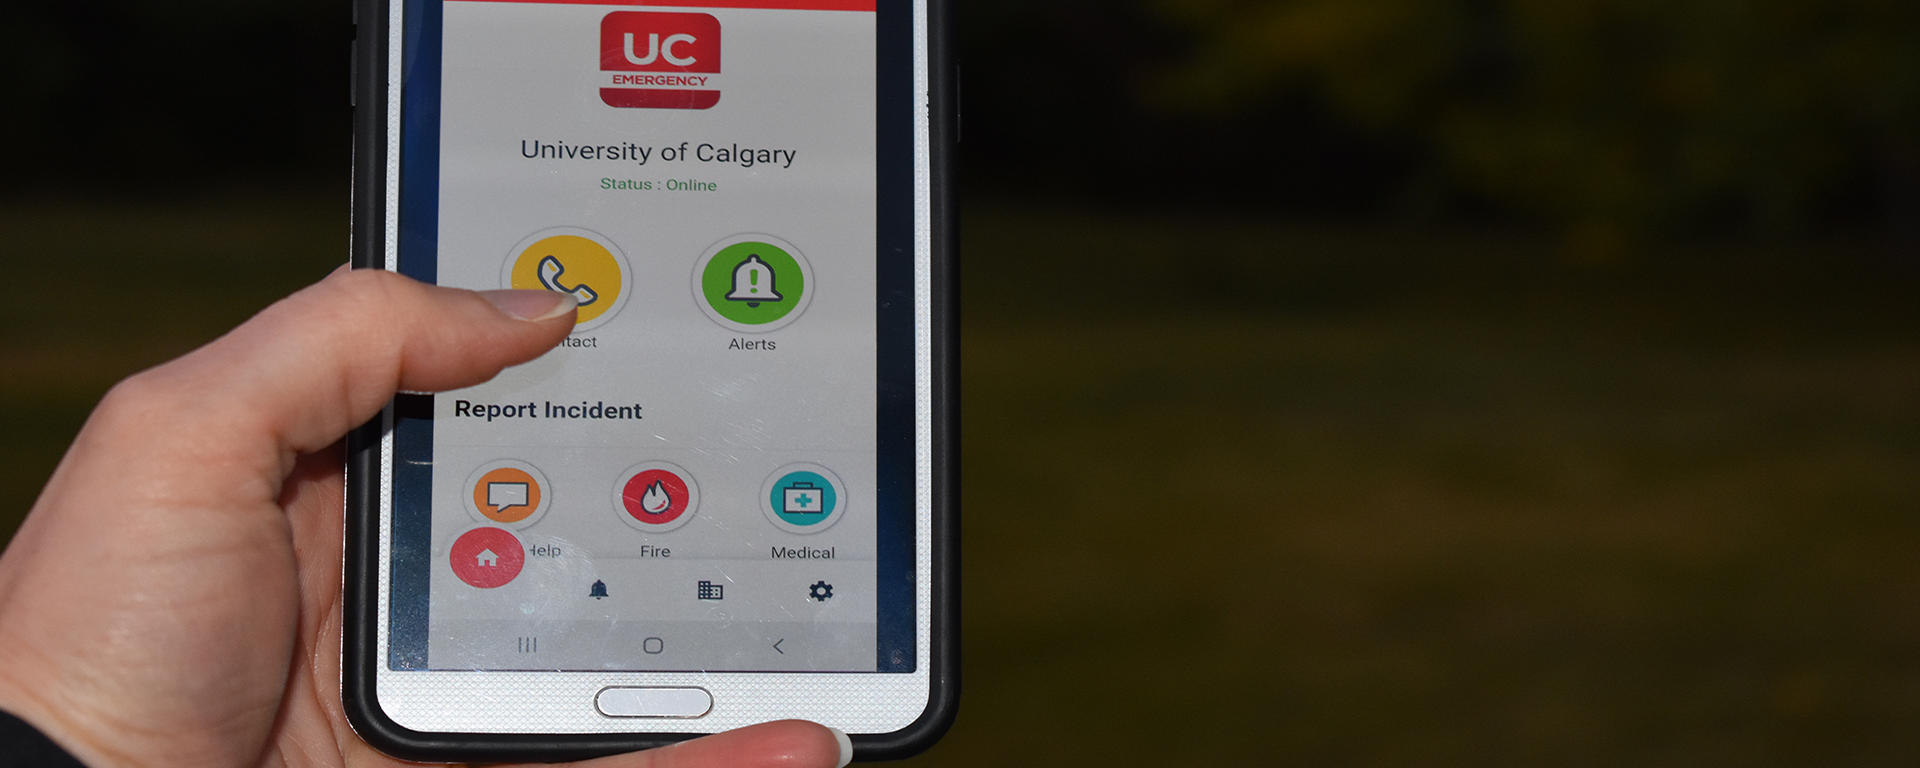 Image of smart phone with UC Emergency Mobile app opened to home screen